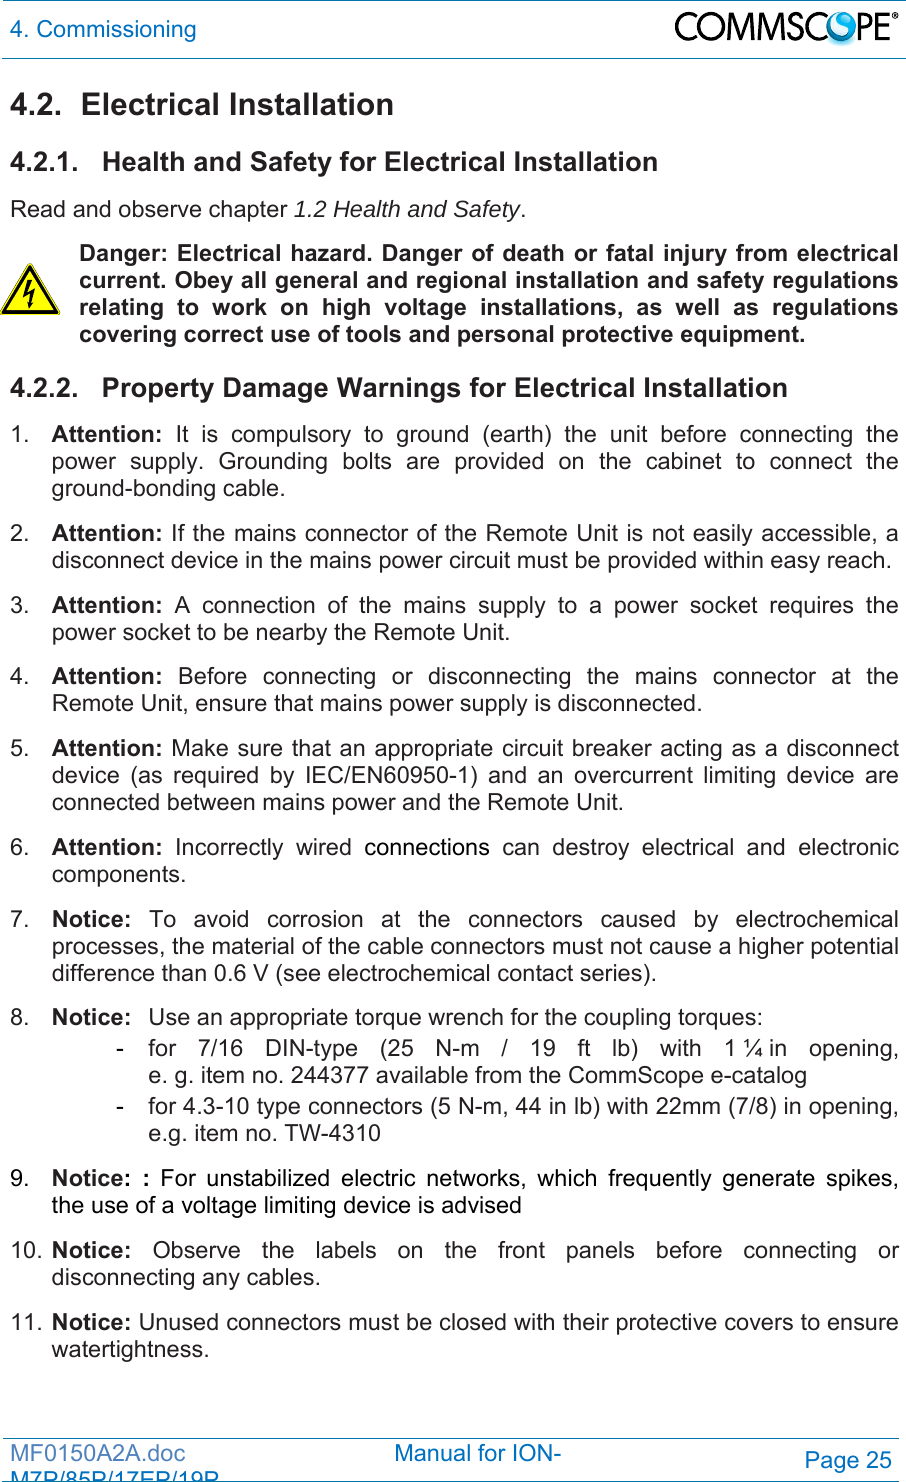 4. Commissioning  MF0150A2A.doc                                Manual for ION-M7P/85P/17EP/19PPage 25 4.2. Electrical Installation 4.2.1.  Health and Safety for Electrical Installation Read and observe chapter 1.2 Health and Safety. Danger: Electrical hazard. Danger of death or fatal injury from electrical current. Obey all general and regional installation and safety regulations relating to work on high voltage installations, as well as regulations covering correct use of tools and personal protective equipment. 4.2.2.  Property Damage Warnings for Electrical Installation 1.  Attention: It is compulsory to ground (earth) the unit before connecting the power supply. Grounding bolts are provided on the cabinet to connect the ground-bonding cable.  2.  Attention: If the mains connector of the Remote Unit is not easily accessible, a disconnect device in the mains power circuit must be provided within easy reach. 3.  Attention: A connection of the mains supply to a power socket requires the power socket to be nearby the Remote Unit. 4.  Attention:  Before connecting or disconnecting the mains connector at the Remote Unit, ensure that mains power supply is disconnected. 5.  Attention: Make sure that an appropriate circuit breaker acting as a disconnect device (as required by IEC/EN60950-1) and an overcurrent limiting device are connected between mains power and the Remote Unit. 6.  Attention: Incorrectly wired connections can destroy electrical and electronic components.  7.  Notice: To avoid corrosion at the connectors caused by electrochemical processes, the material of the cable connectors must not cause a higher potential difference than 0.6 V (see electrochemical contact series). 8.  Notice:  Use an appropriate torque wrench for the coupling torques:  - for 7/16 DIN-type (25 N-m / 19 ft lb) with 1 ¼ in opening,   e. g. item no. 244377 available from the CommScope e-catalog  - for 4.3-10 type connectors (5 N-m, 44 in lb) with 22mm (7/8) in opening,    e.g. item no. TW-4310 9.  Notice: : For unstabilized electric networks, which frequently generate spikes, the use of a voltage limiting device is advised  10. Notice: Observe the labels on the front panels before connecting or disconnecting any cables. 11. Notice: Unused connectors must be closed with their protective covers to ensure watertightness. 